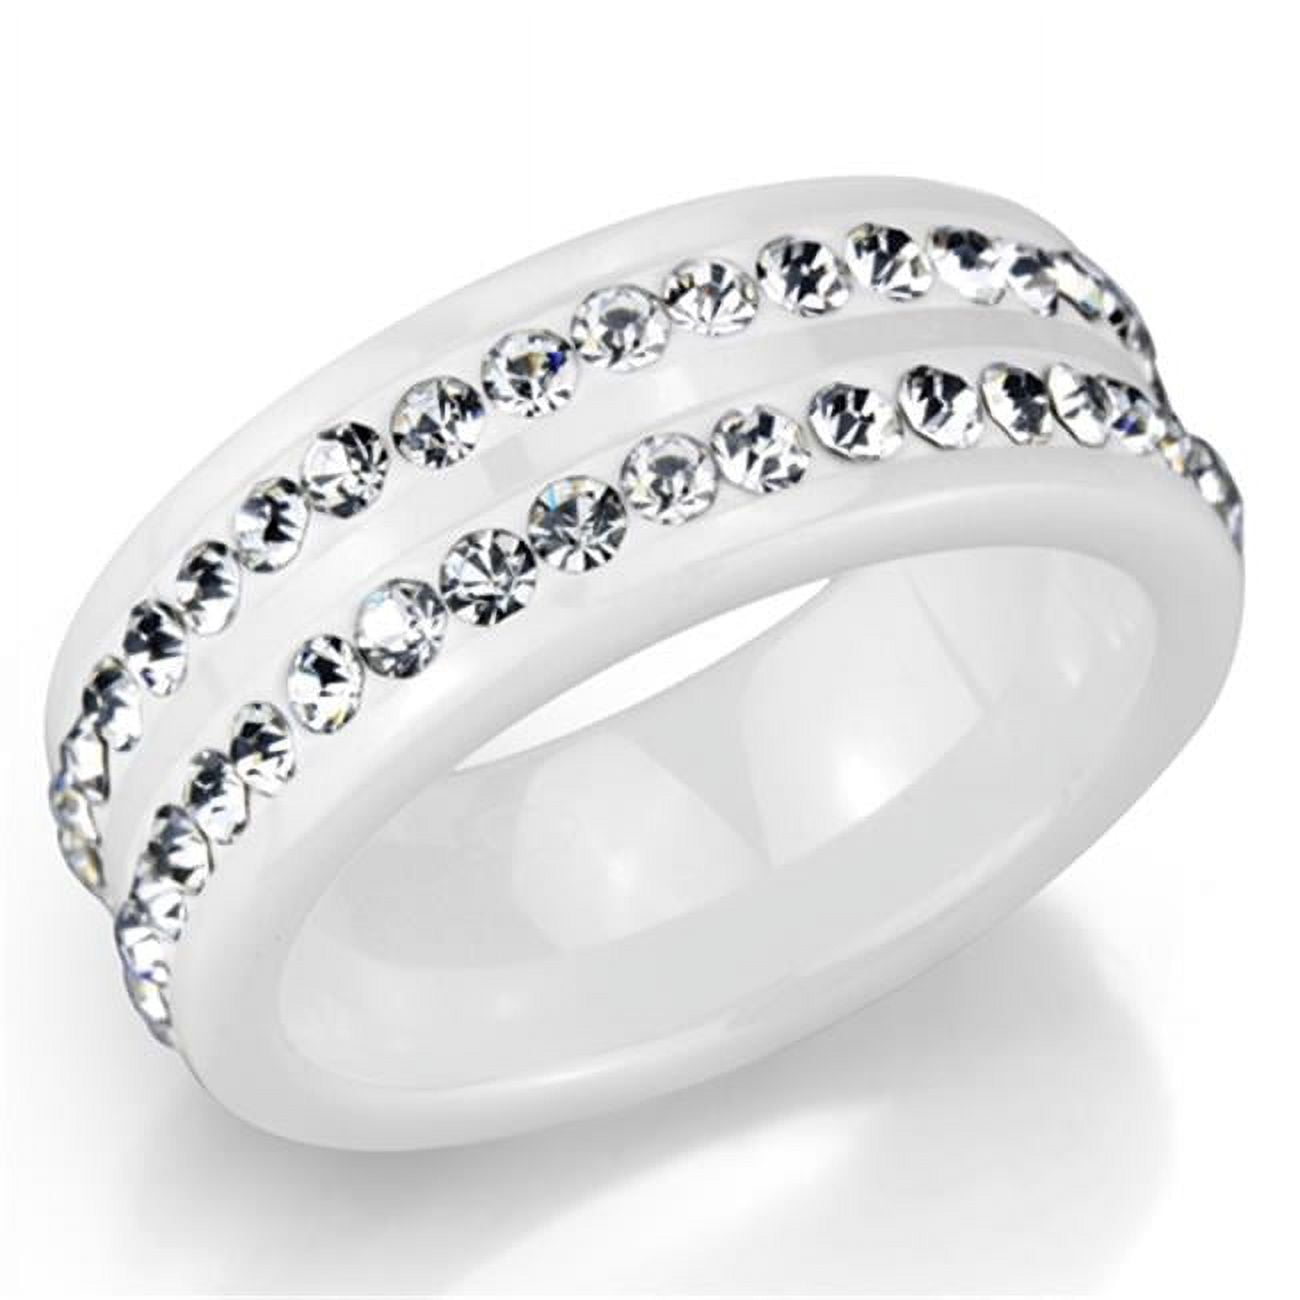 Picture of Alamode 3W970-7 Women High Polished Stainless Steel Ring with Ceramic in White - Size 7